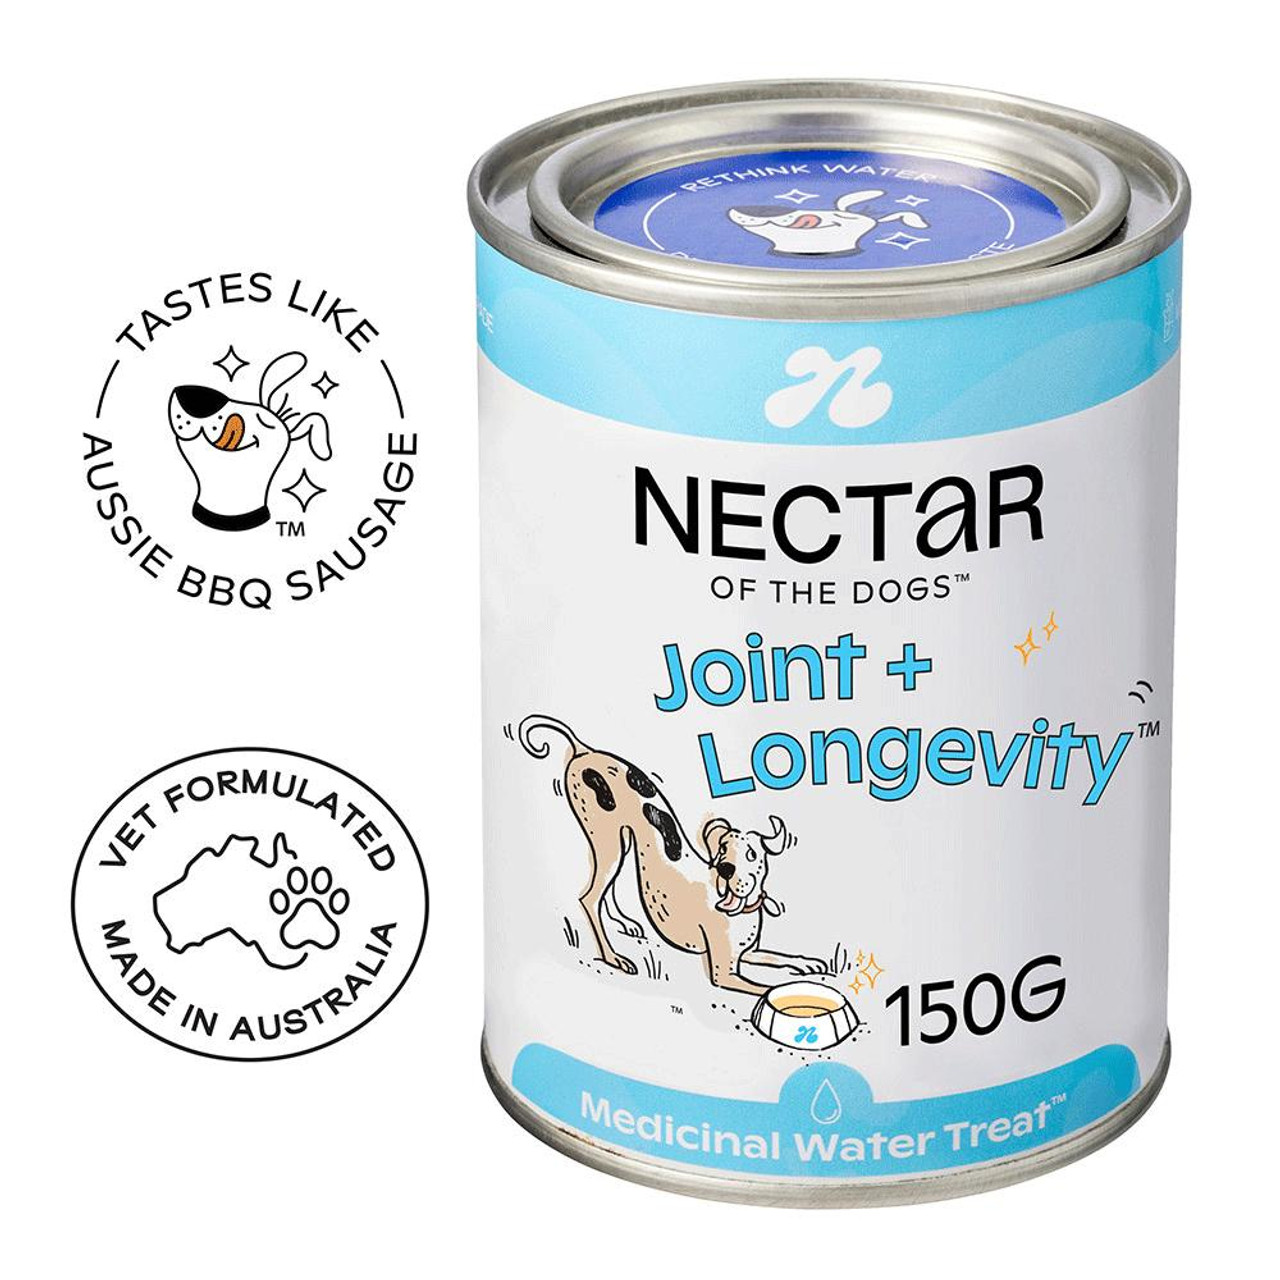  Nectar Of The Dogs Joint + Longevity 150g 